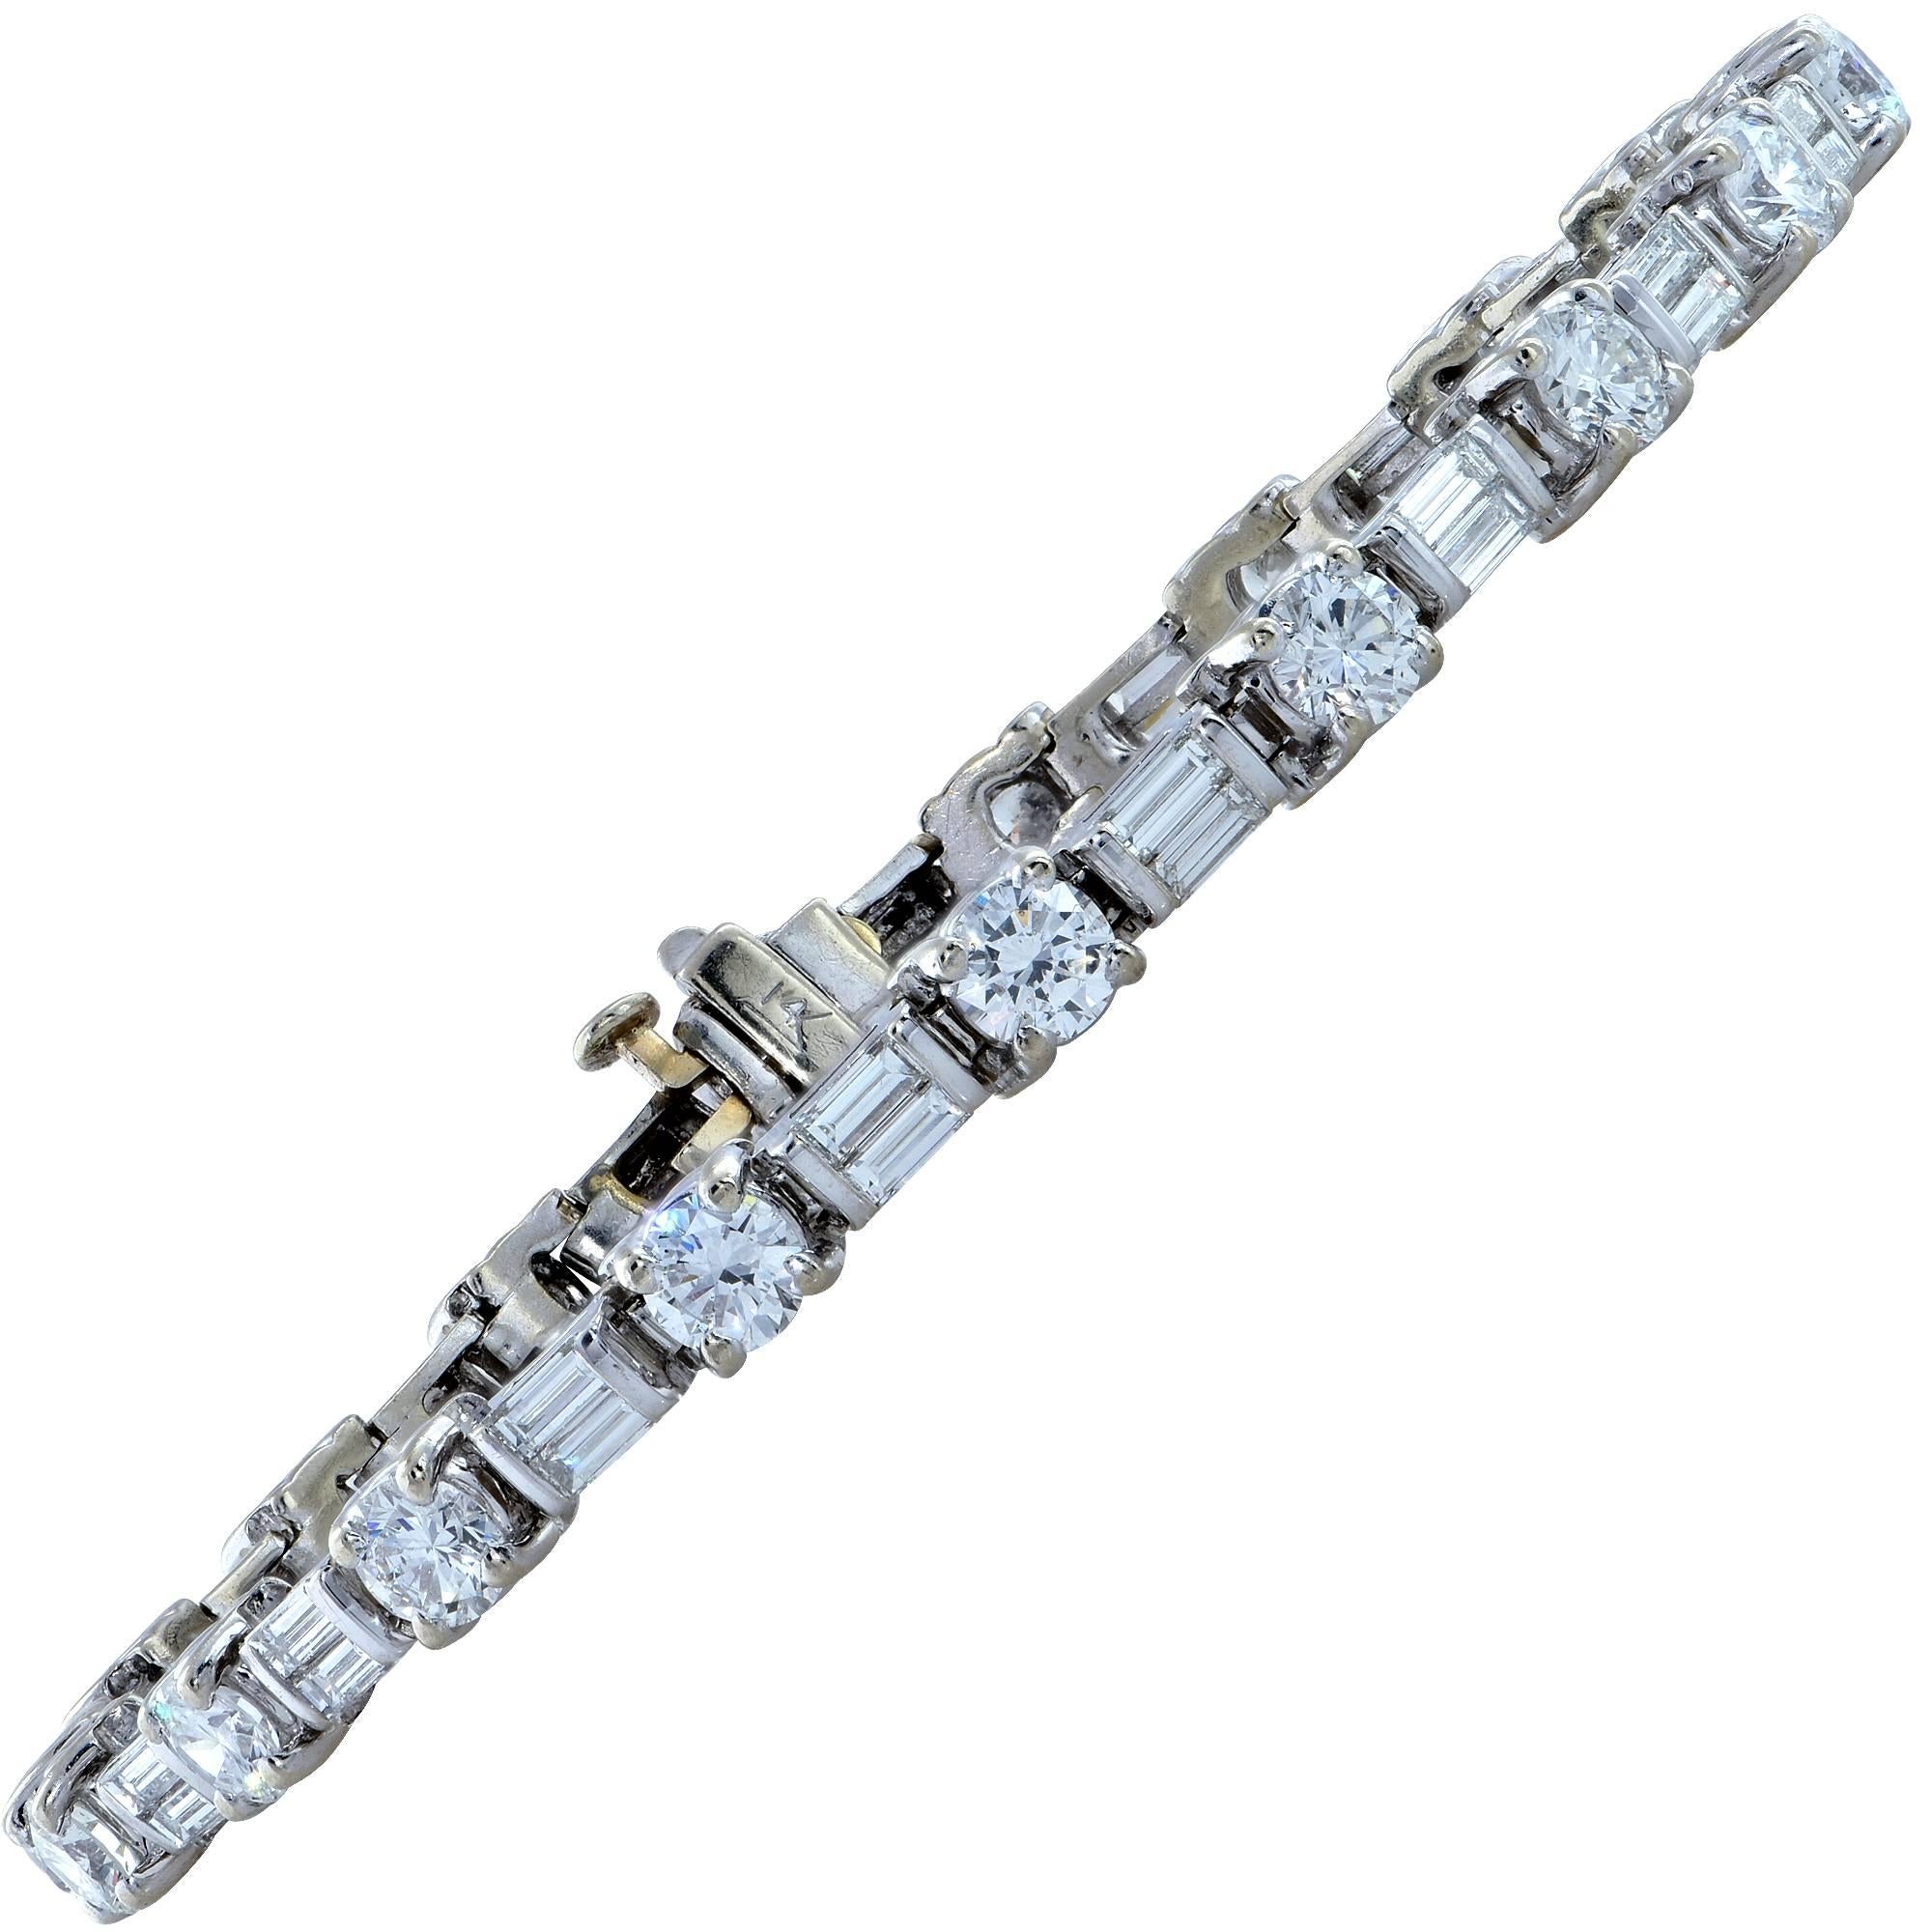 14k white gold bracelet containing 19 round brilliant cut diamonds weighing approximately 5cts and 38 straight baguettes weighing approximately 2cts. All diamonds are F-G color and VS-SI clarity.

This bracelet measure 7.75 inches.
It is stamped